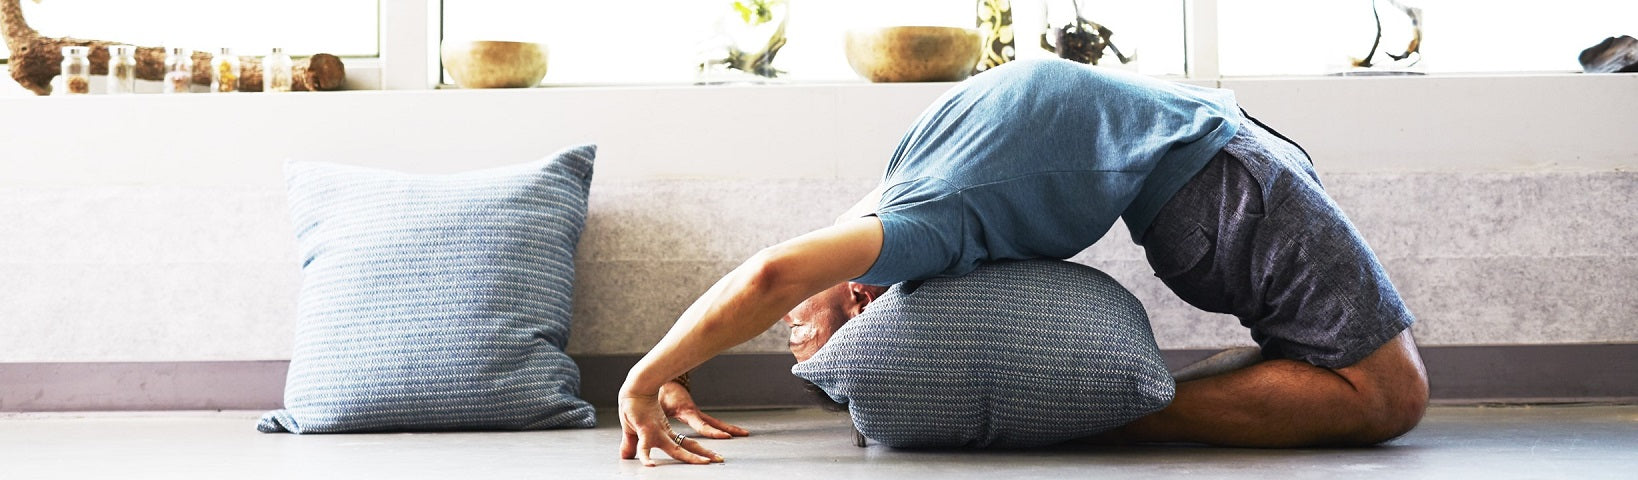 7 EASY YOGA POSES TO RELIEVE STRESS